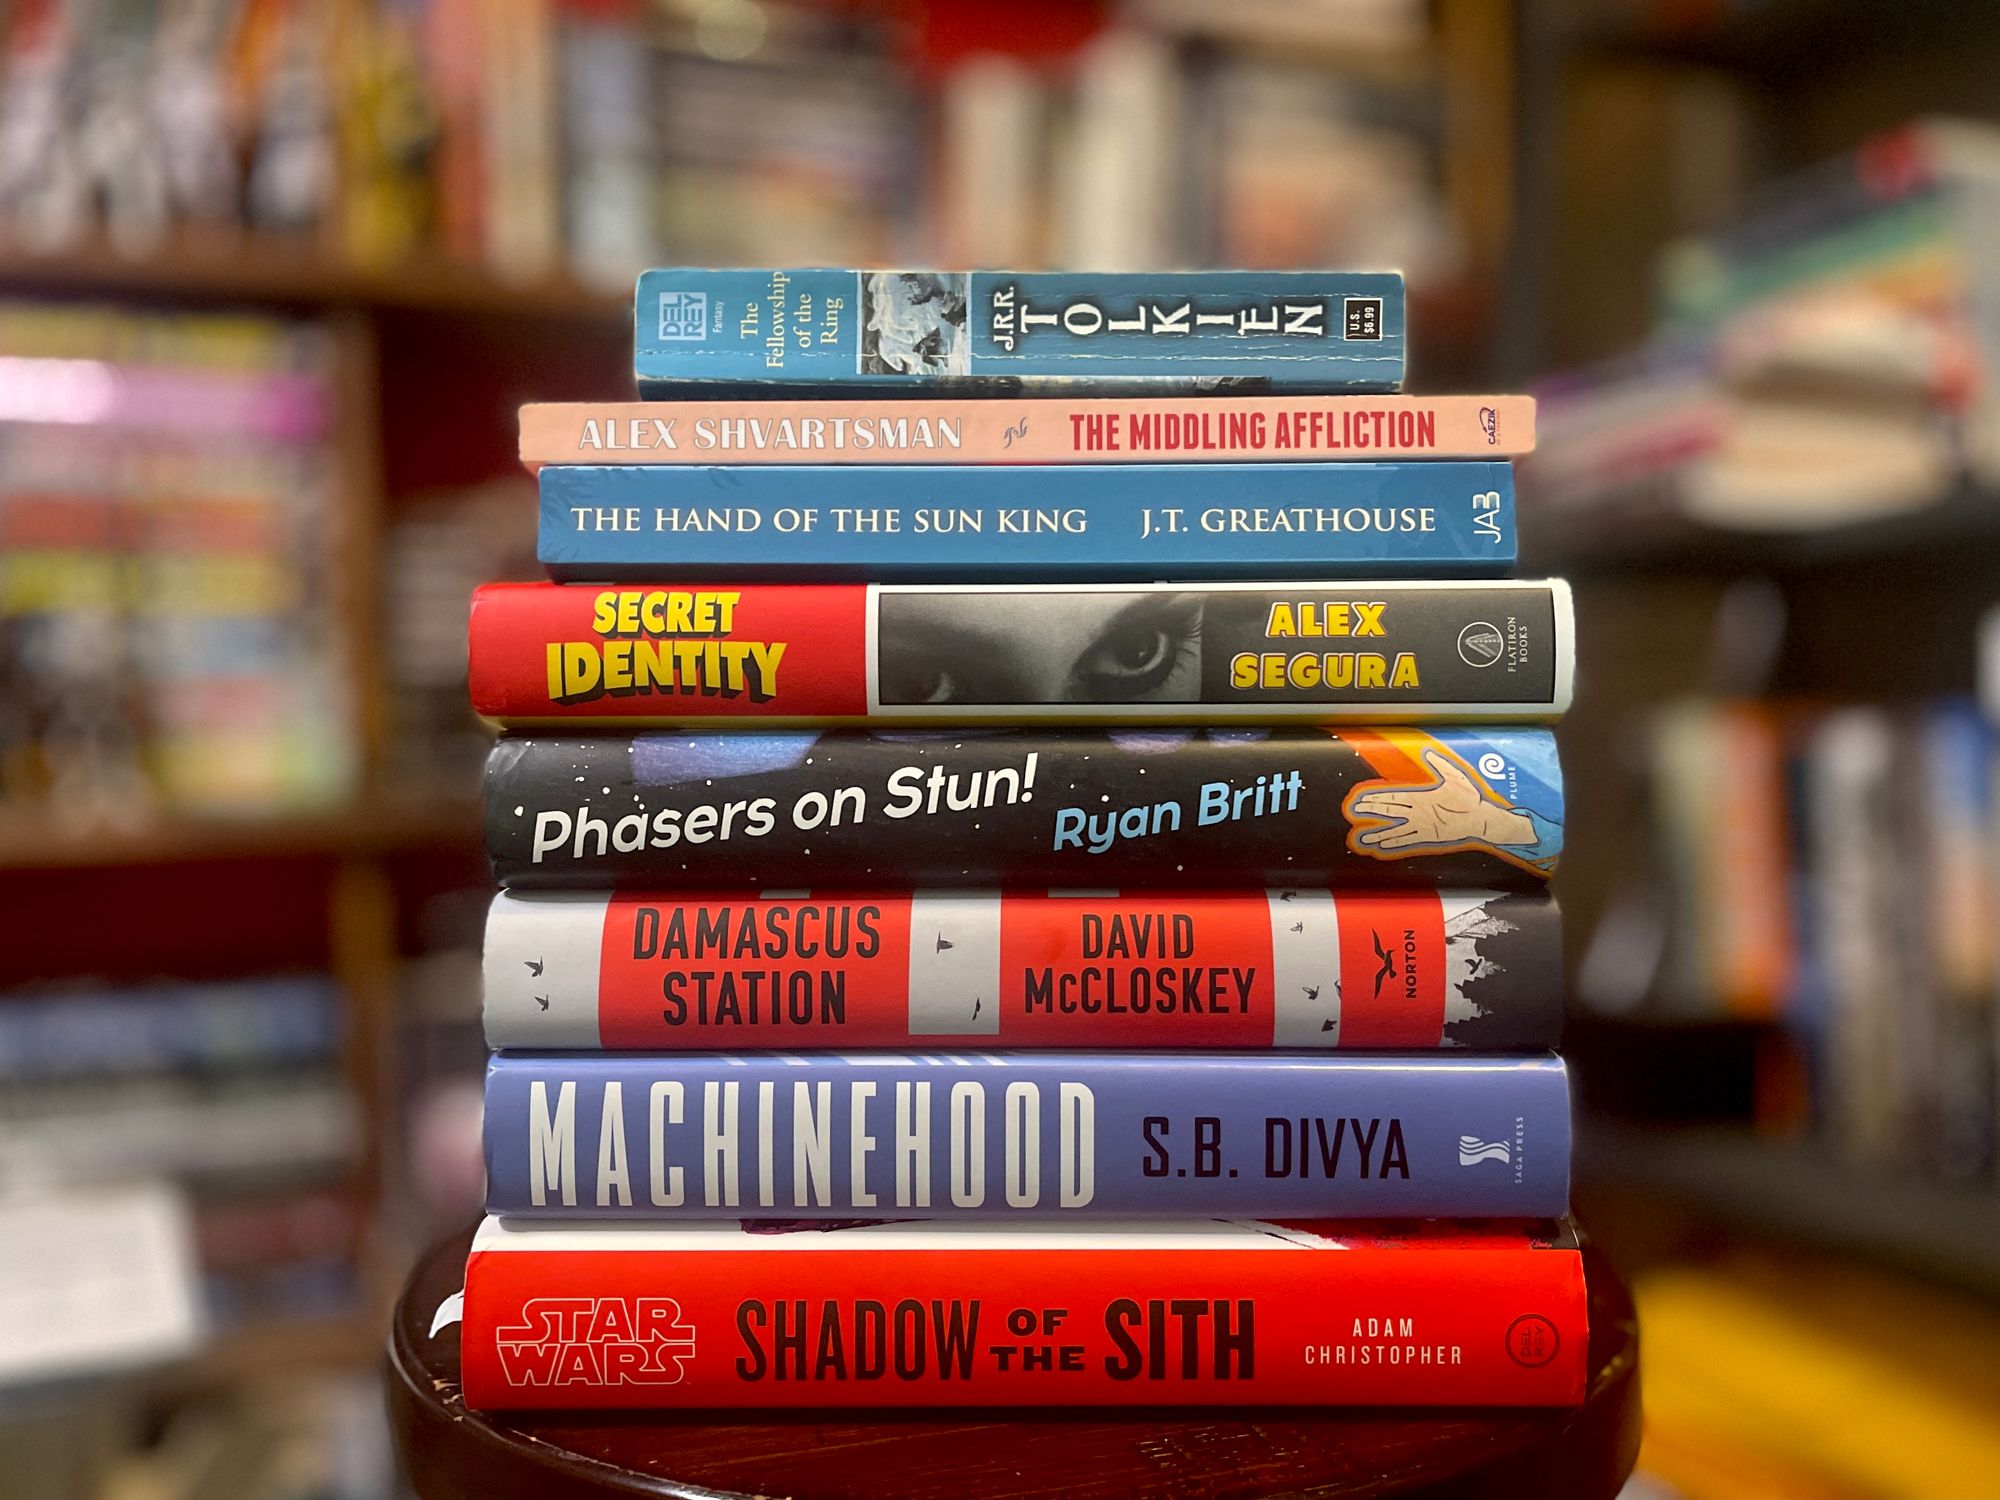 A stack of books: Fellowship of the Ring, The MIddling Affliction, The Hand of the Sun King, Secret Identity, Phasers on Stun! Damascus Station, Machinehood, and Shadow of the Sith